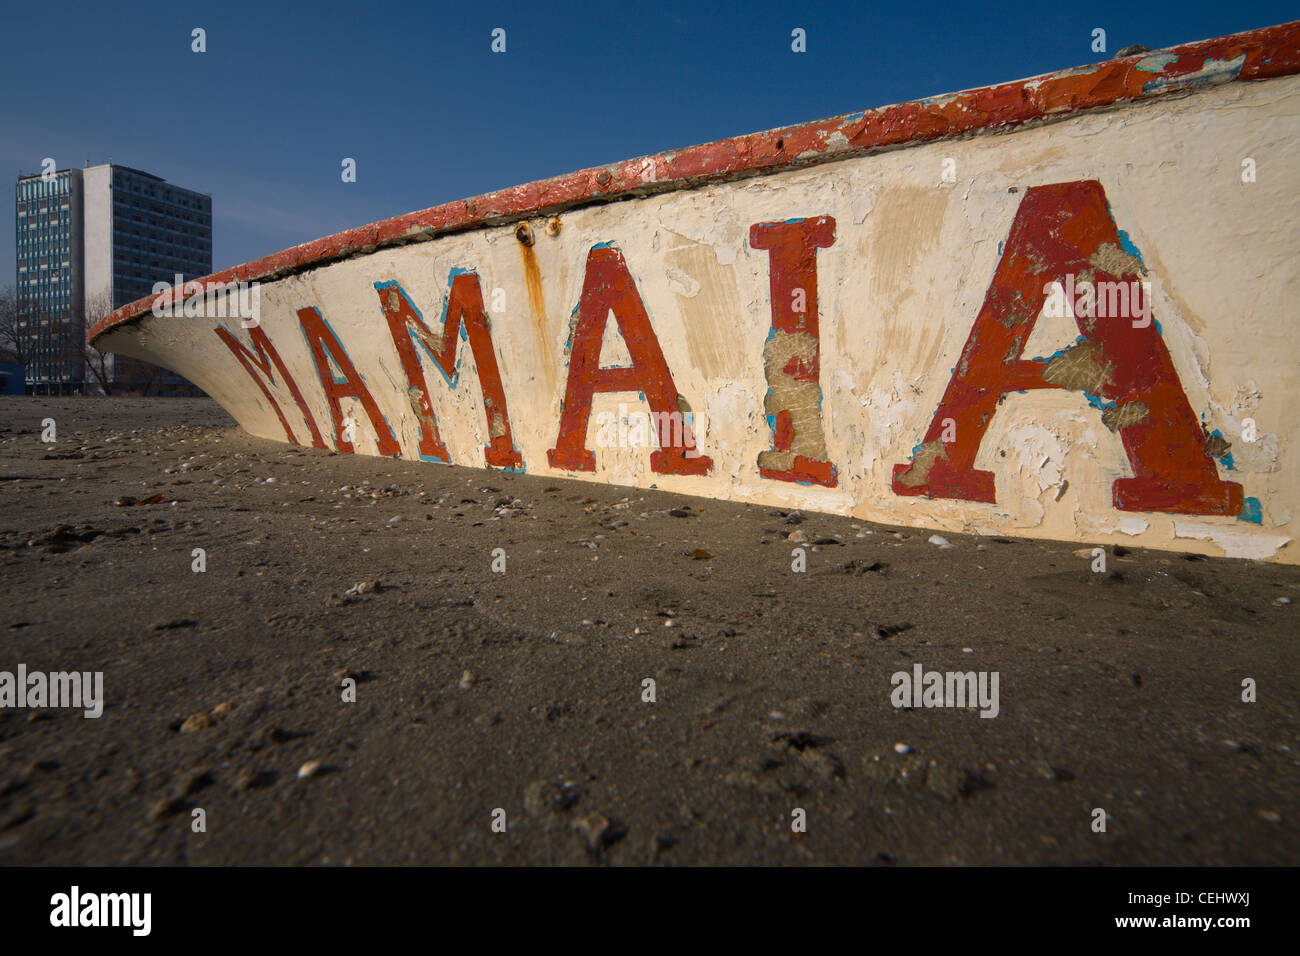 Mamaia resort name written on a wooden boat on the shore of the Black Sea in Constanta, Romania Stock Photo